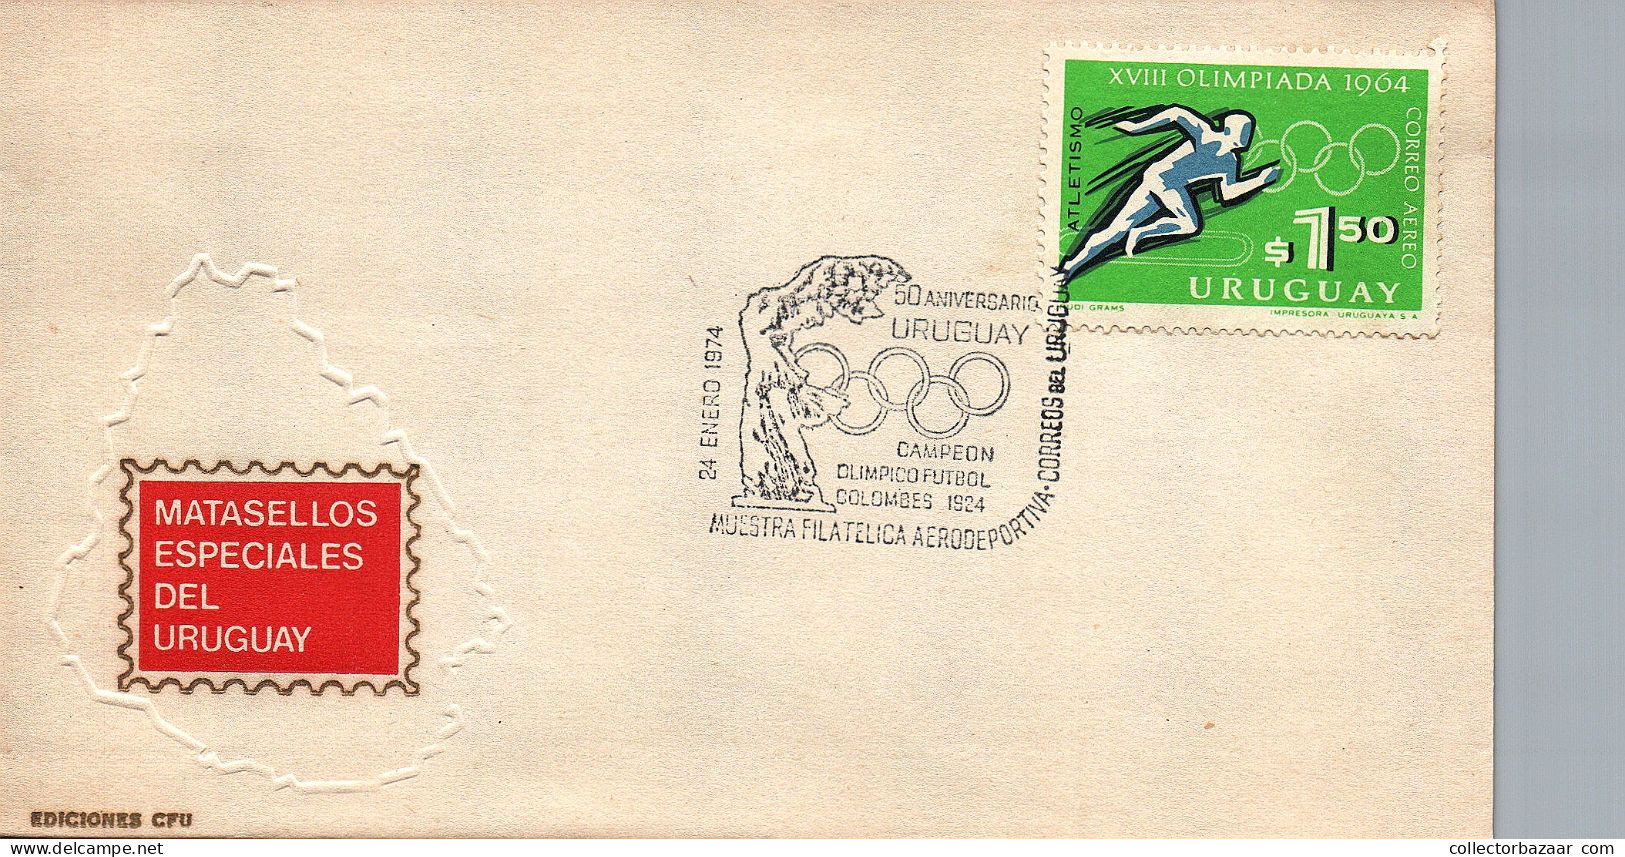 1974 Soccer Football 50th Anniversary Uruguay Olympic Triumph 1924 Paris Colombes Samothrace Greek Sculpture Uruguay FDC - Lettres & Documents